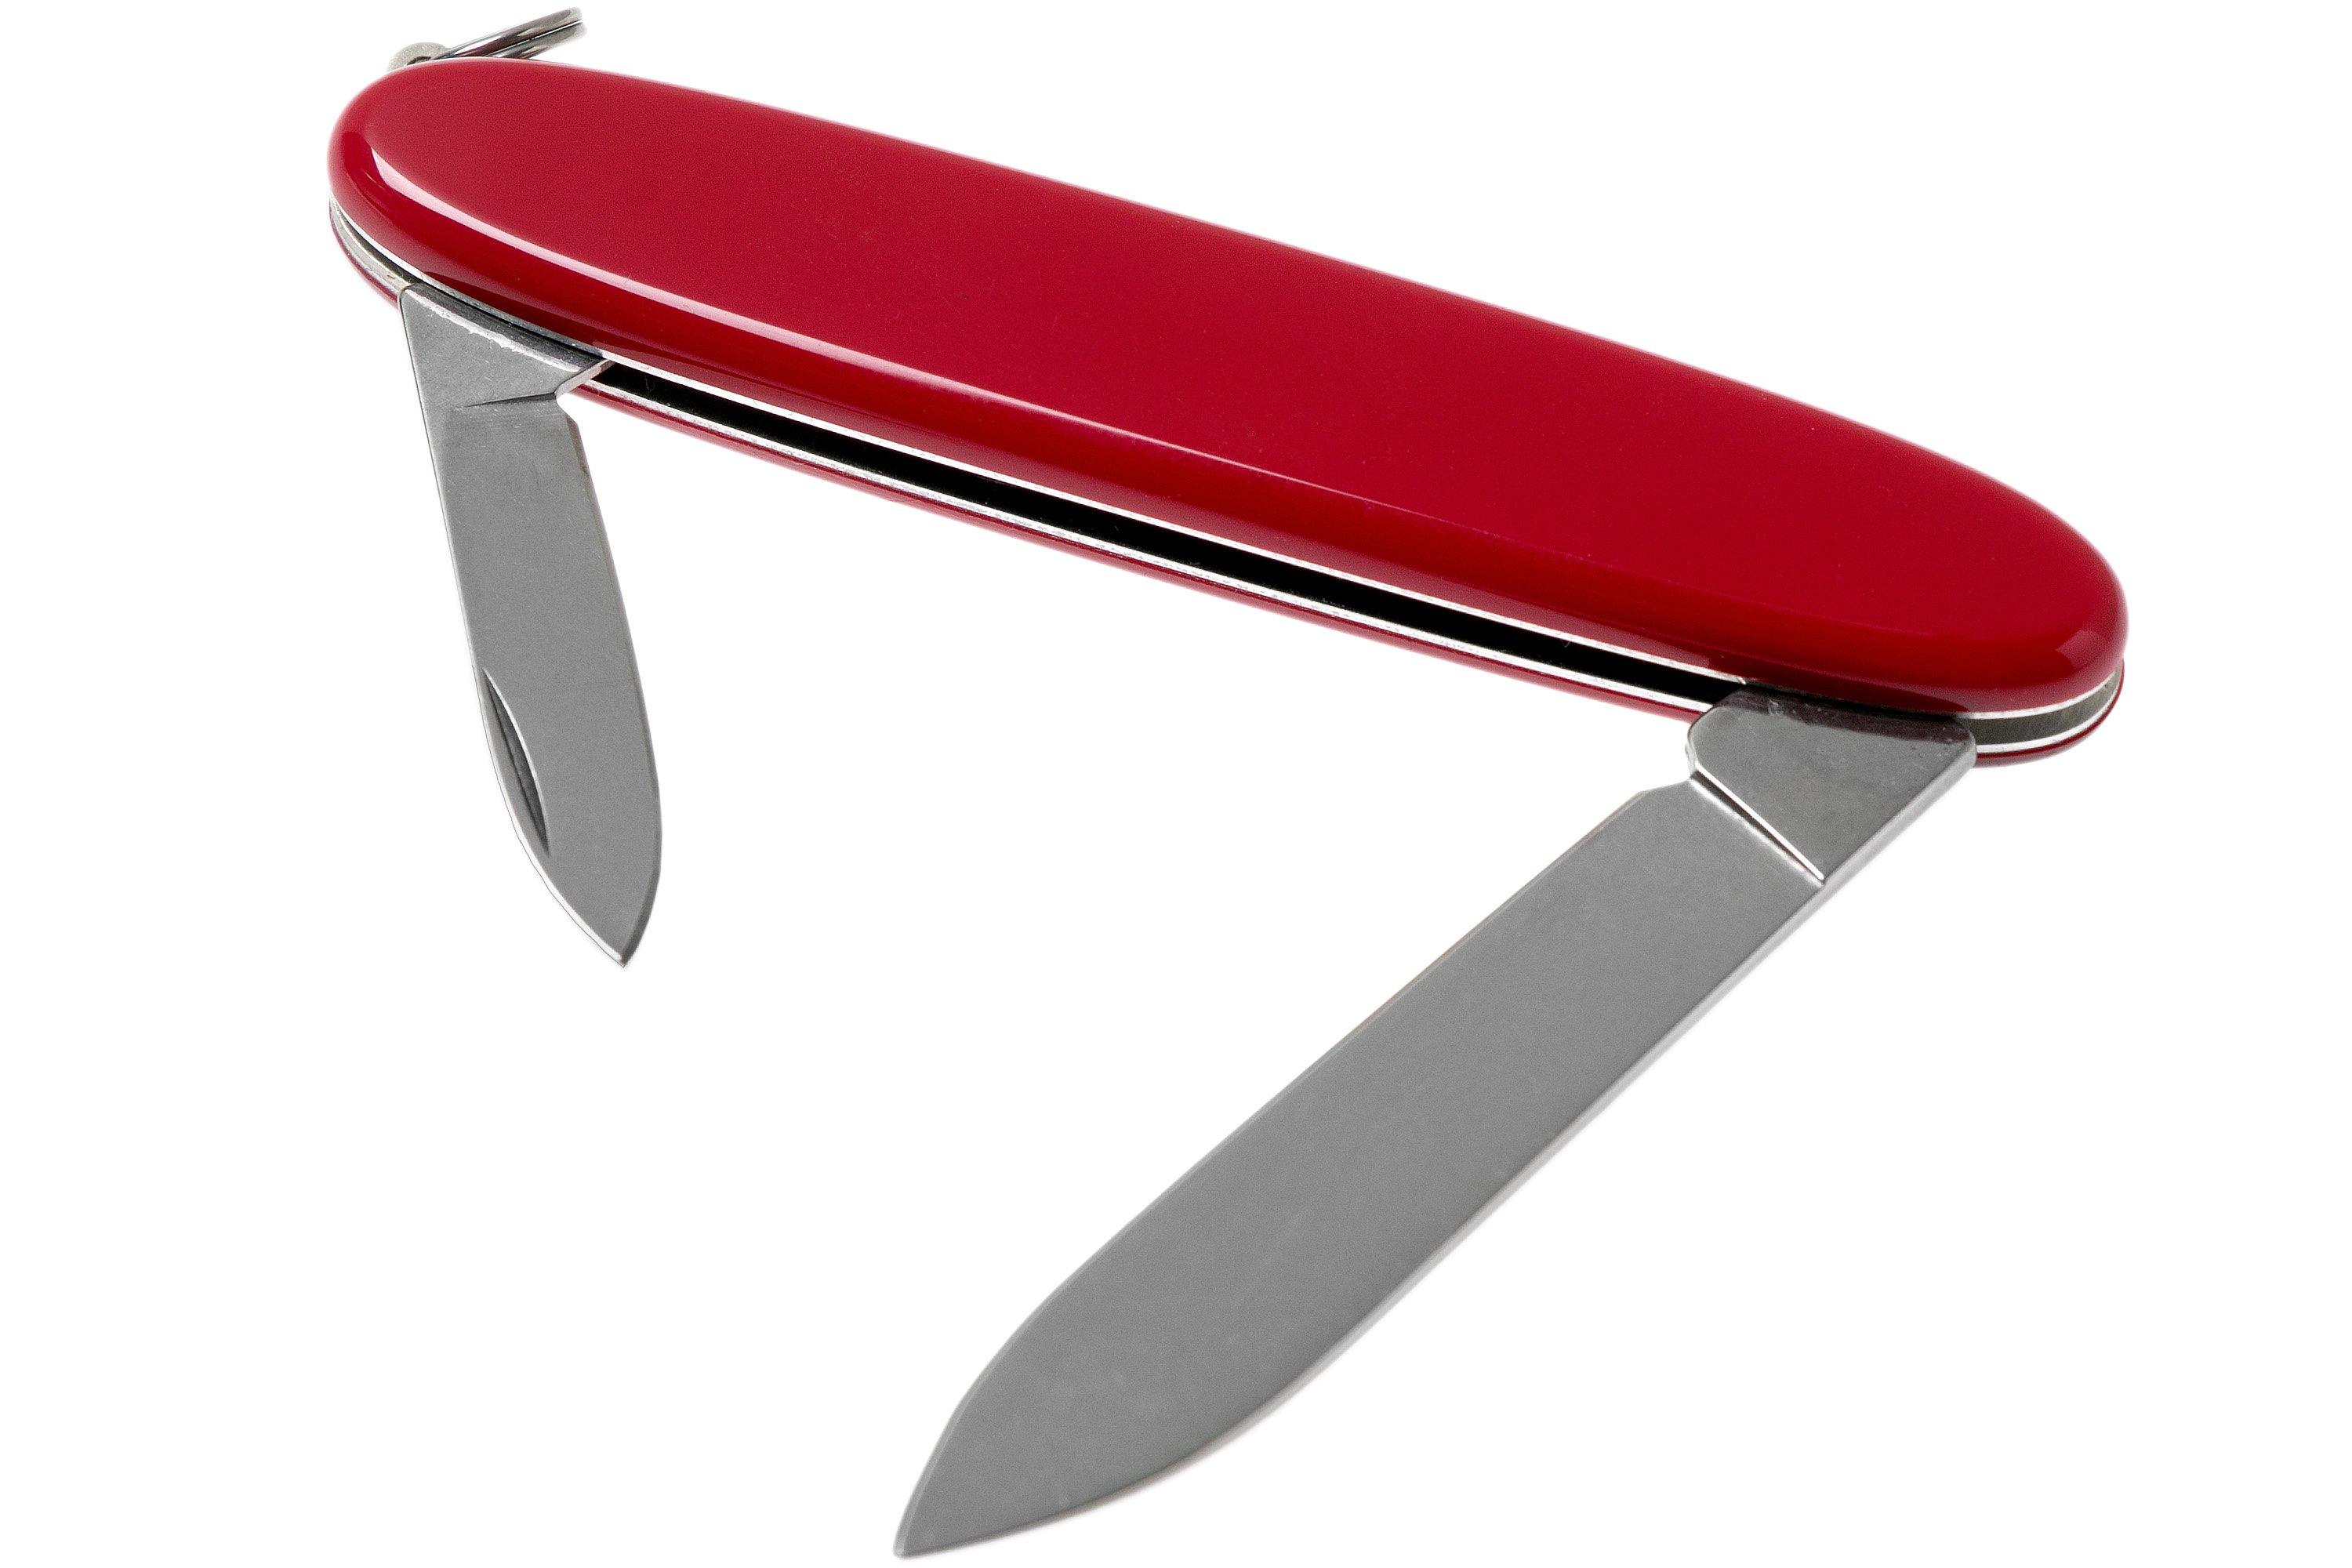 Victorinox Excelsior red 0.6901 Swiss pocket knife | Advantageously .